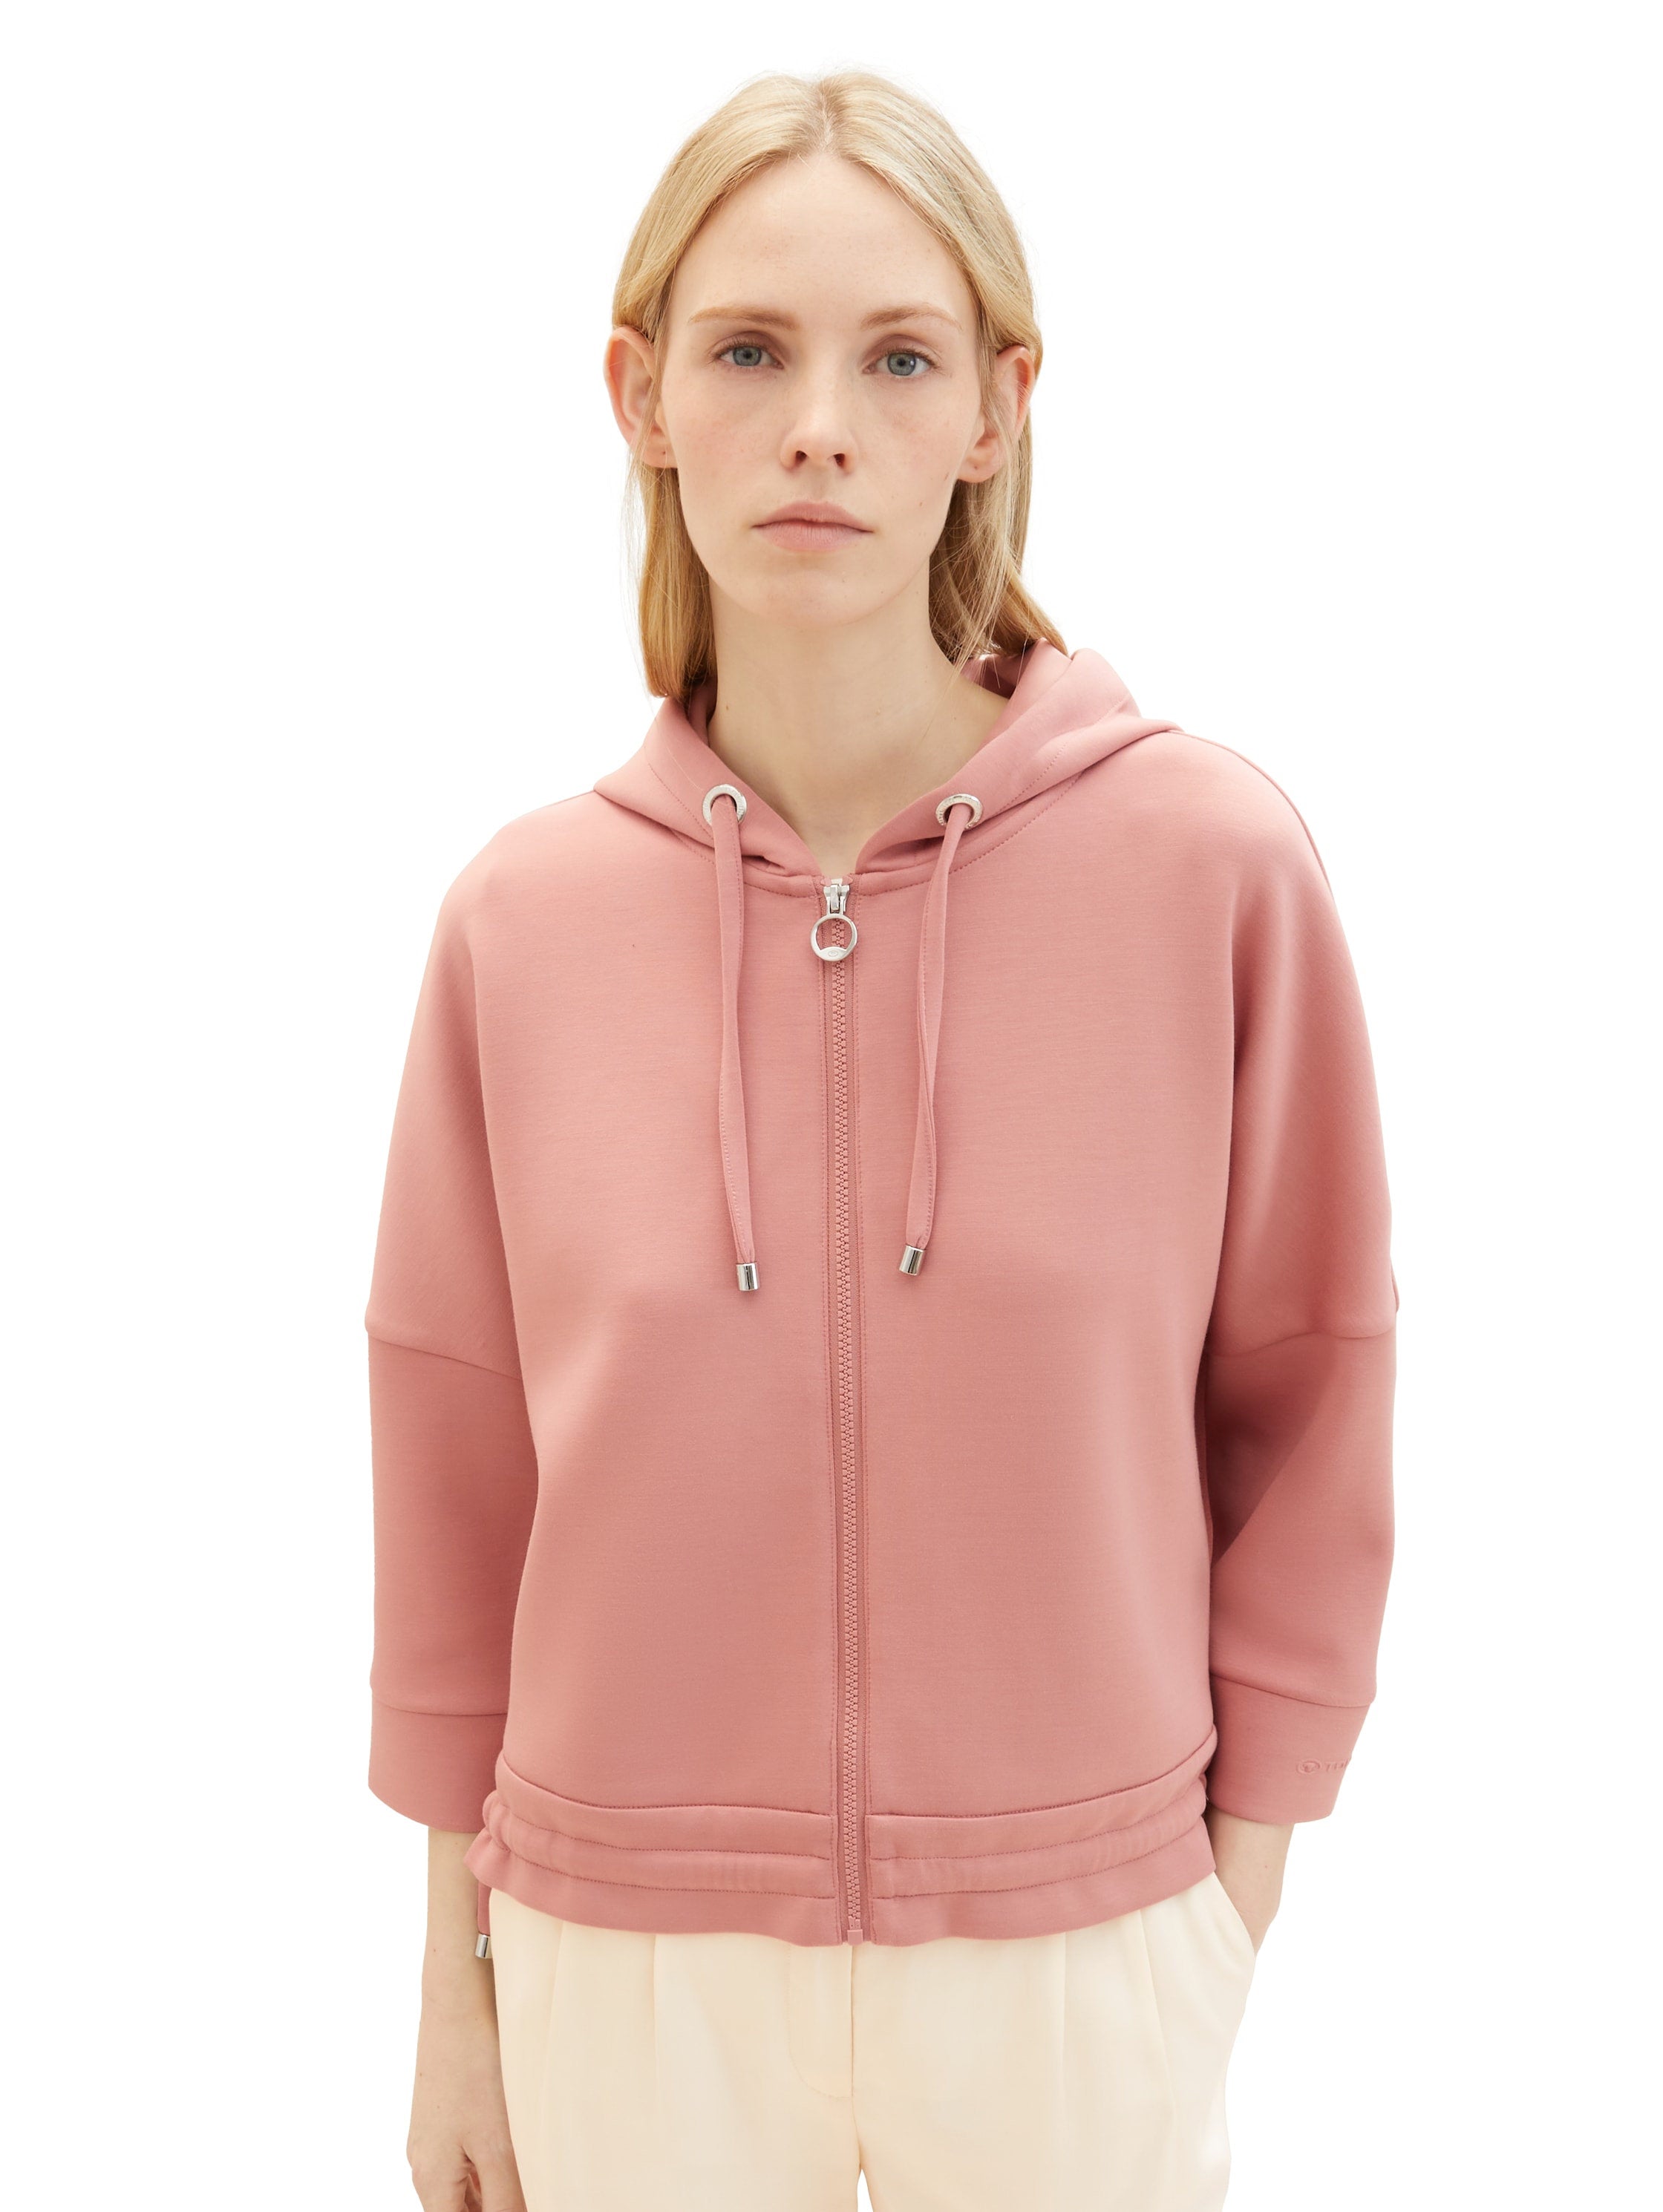 Hoodie With Adjustable Side Strap_1038182_32224_02